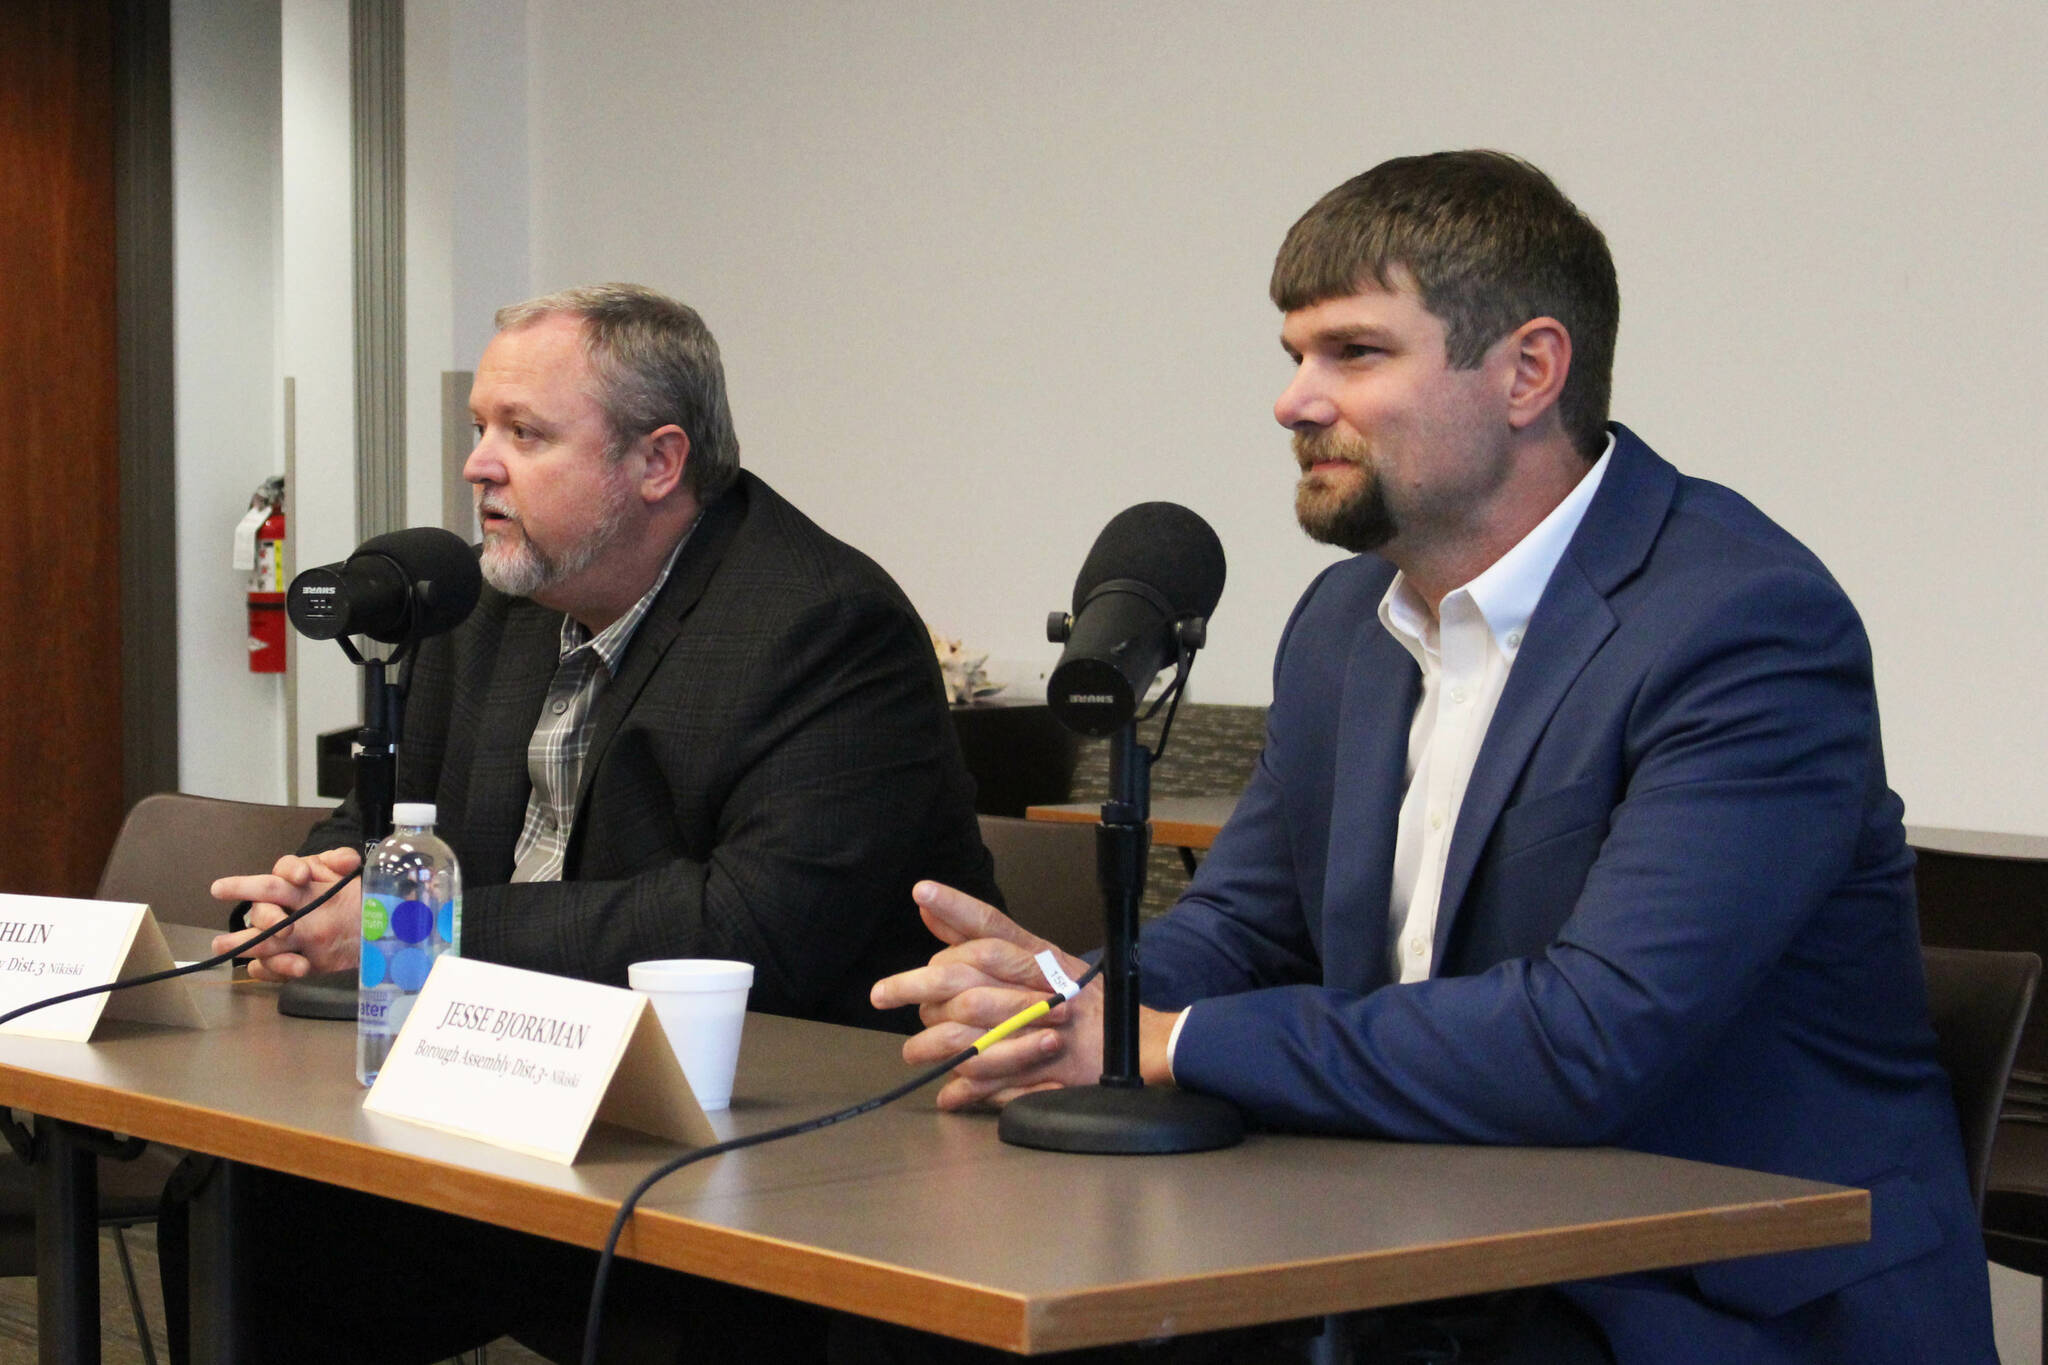 Kenai Peninsula Borough Assembly candidates Dil Uhlin, left, and Jesse Bjorkman participate in a candidate forum at the Soldotna Public Library on Monday, Sept. 26, 2022, in Soldotna, Alaska. Both candidates are running for the assembly’s Nikiski seat. (Ashlyn O’Hara/Peninsula Clarion)